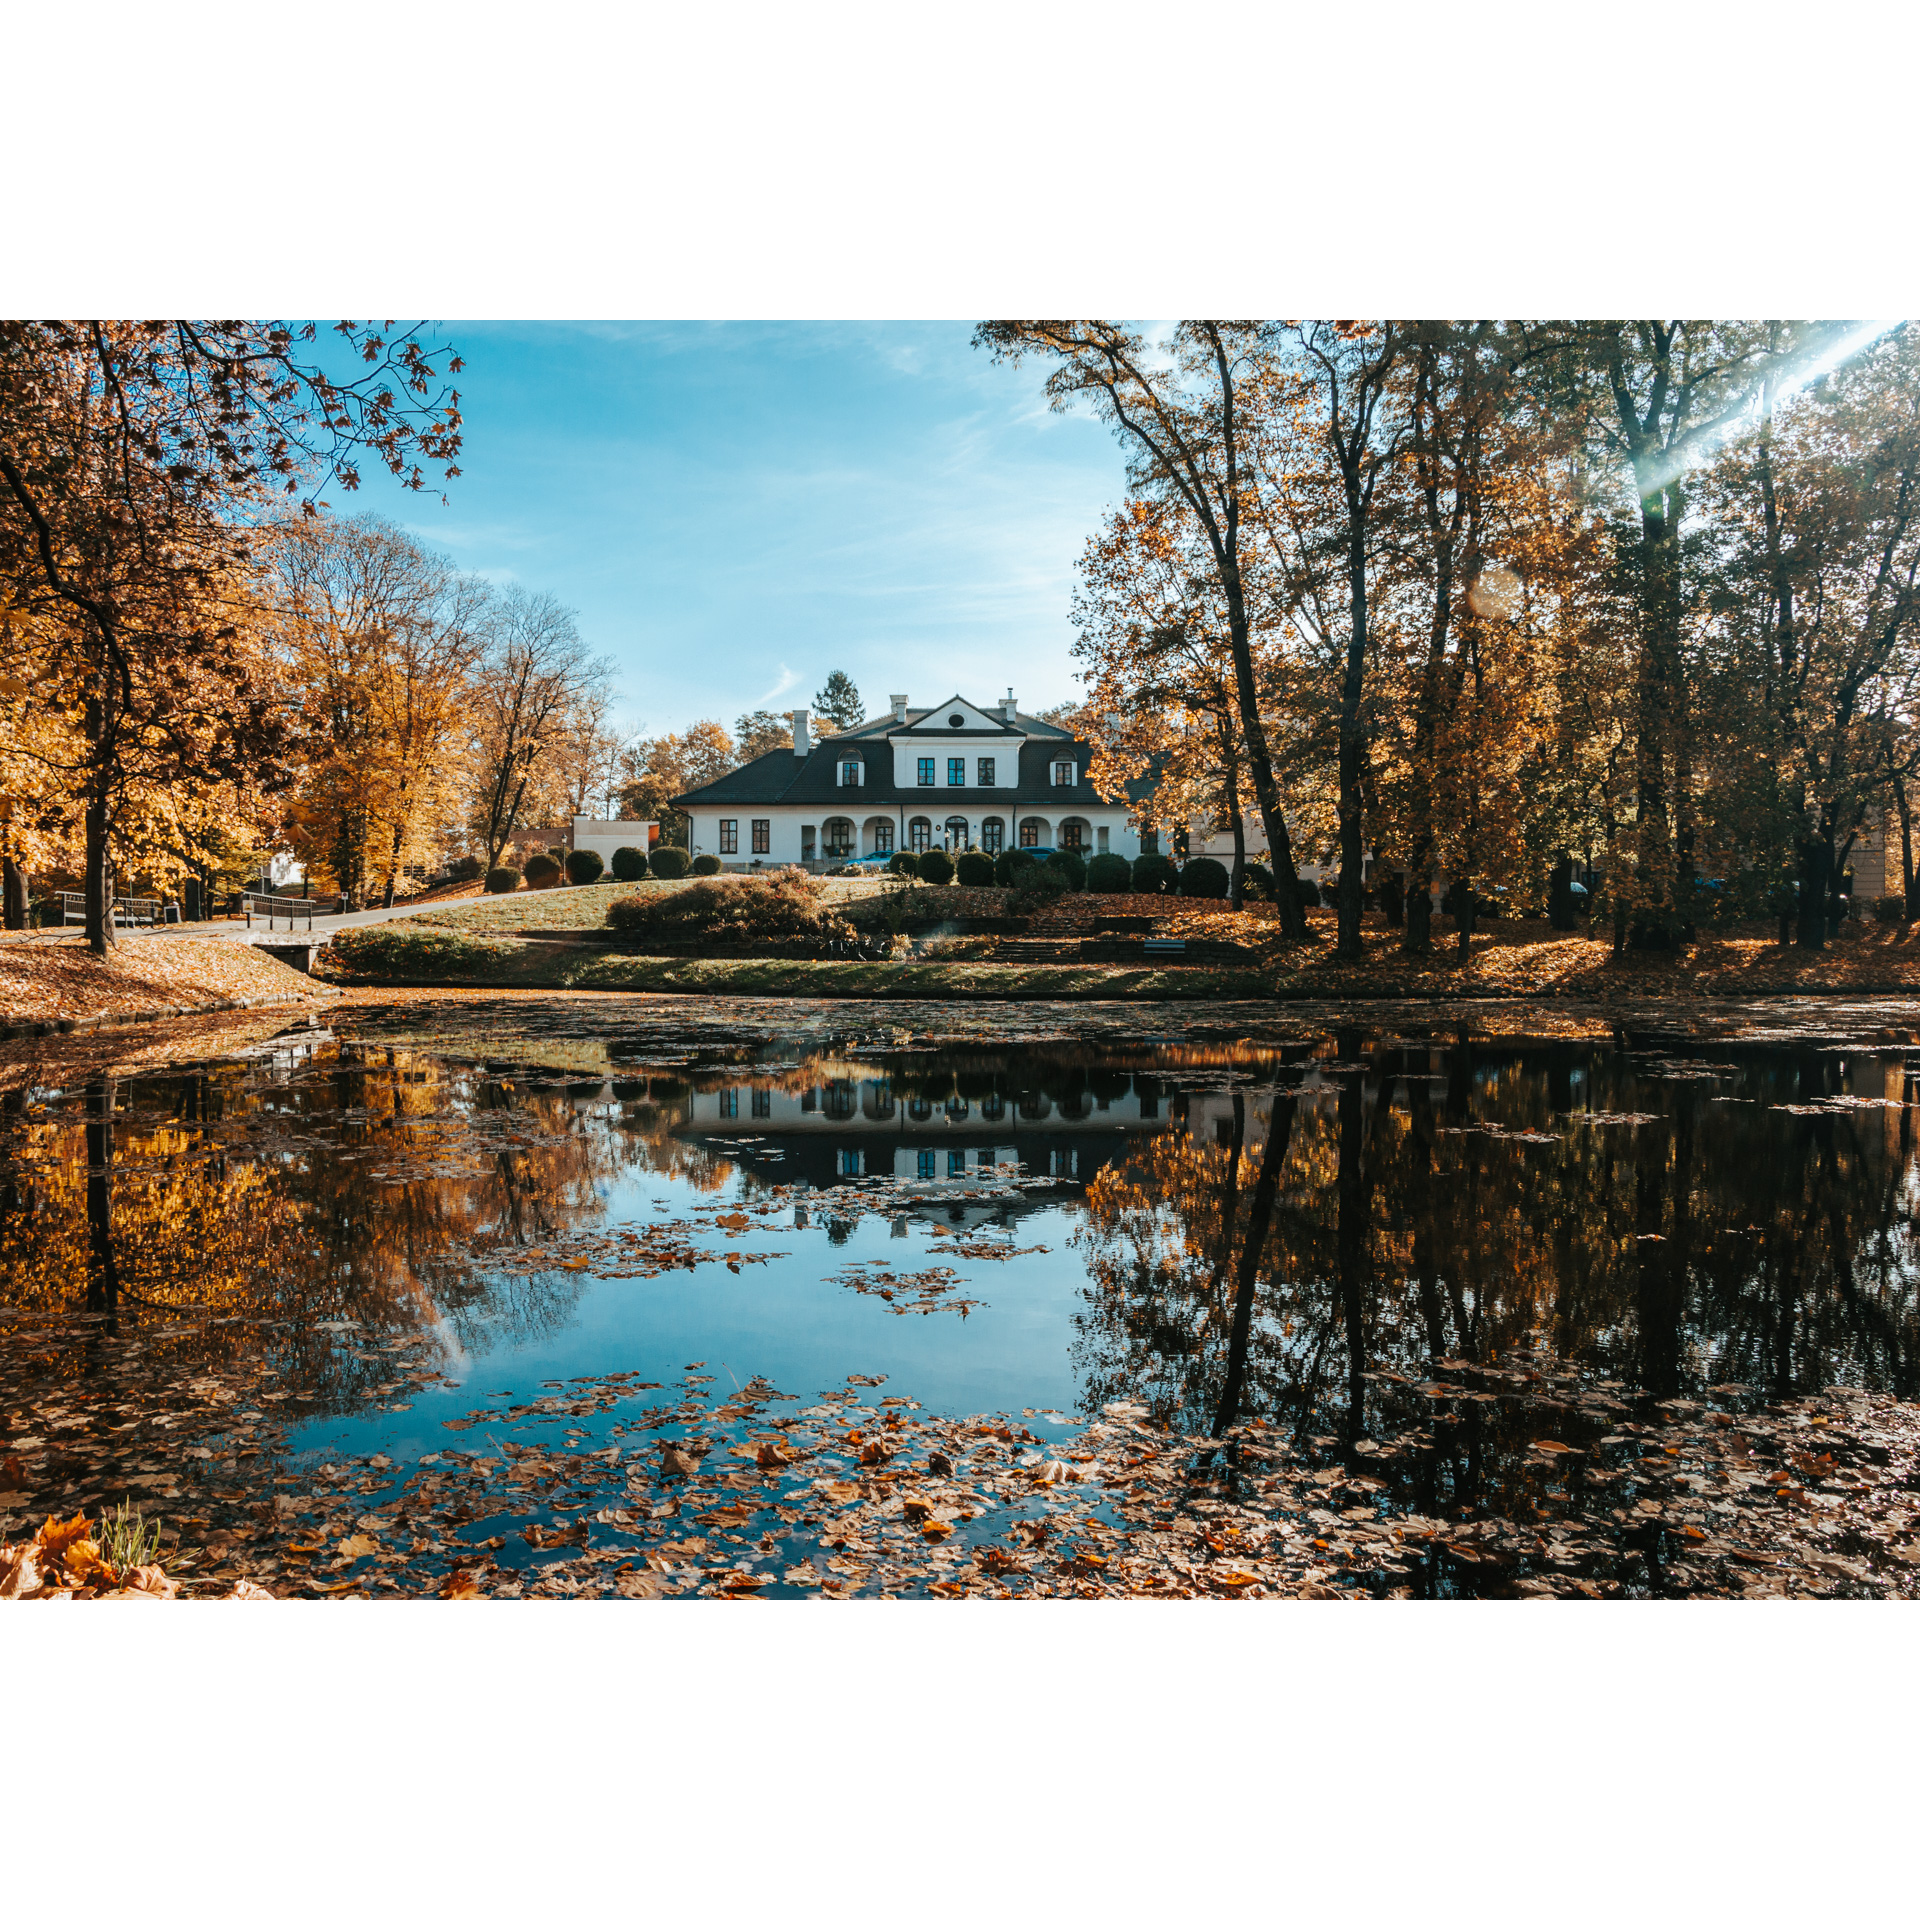 A view of a white manor house from behind a large pond among autumn trees